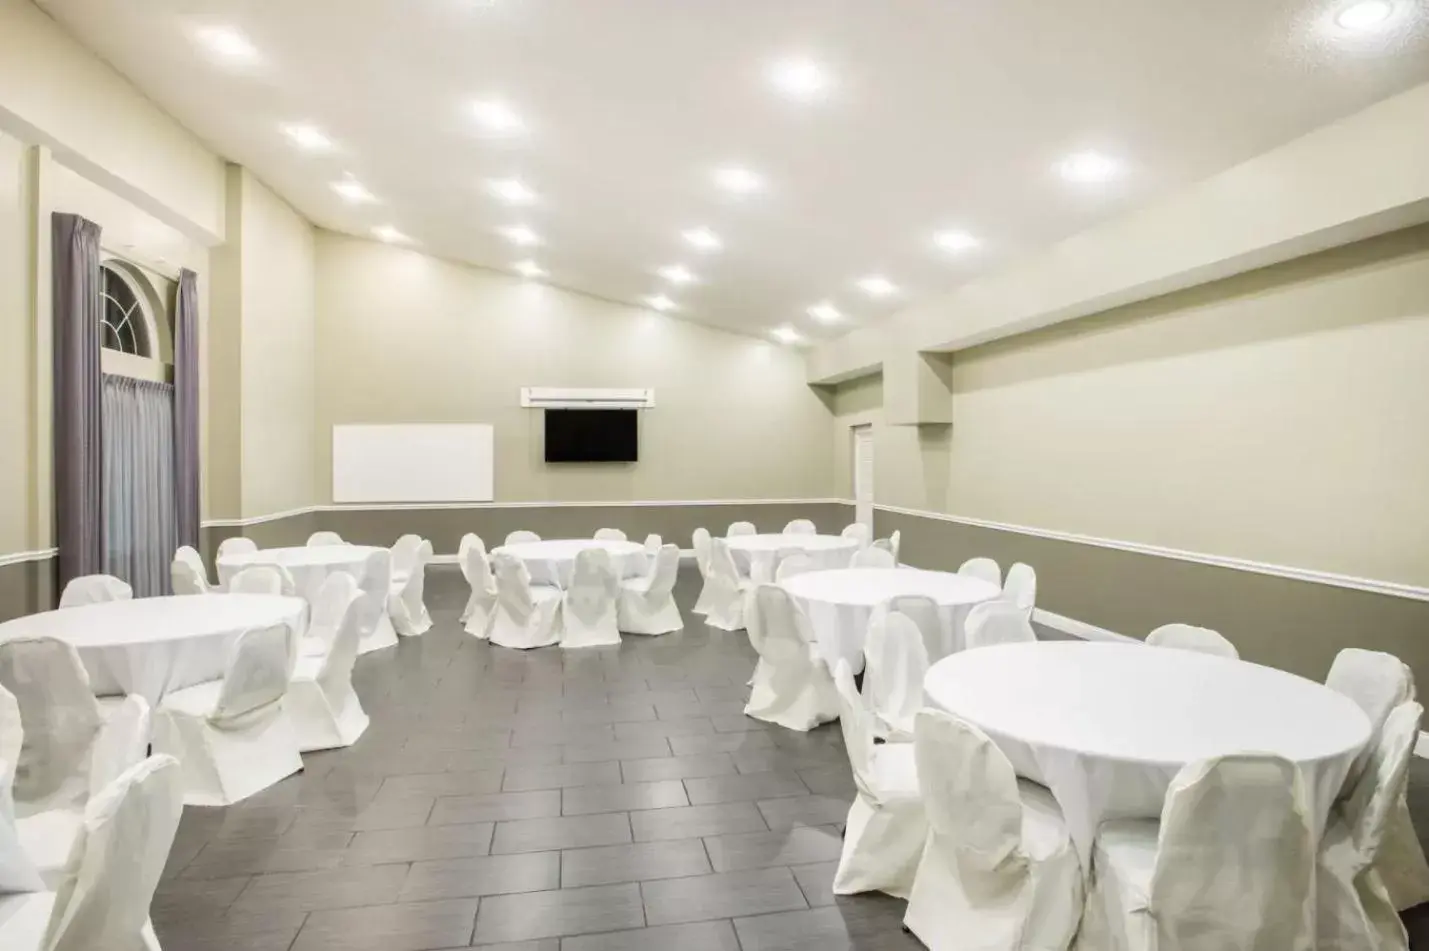 Banquet/Function facilities, Banquet Facilities in Days Inn & Suites by Wyndham Cherry Hill - Philadelphia